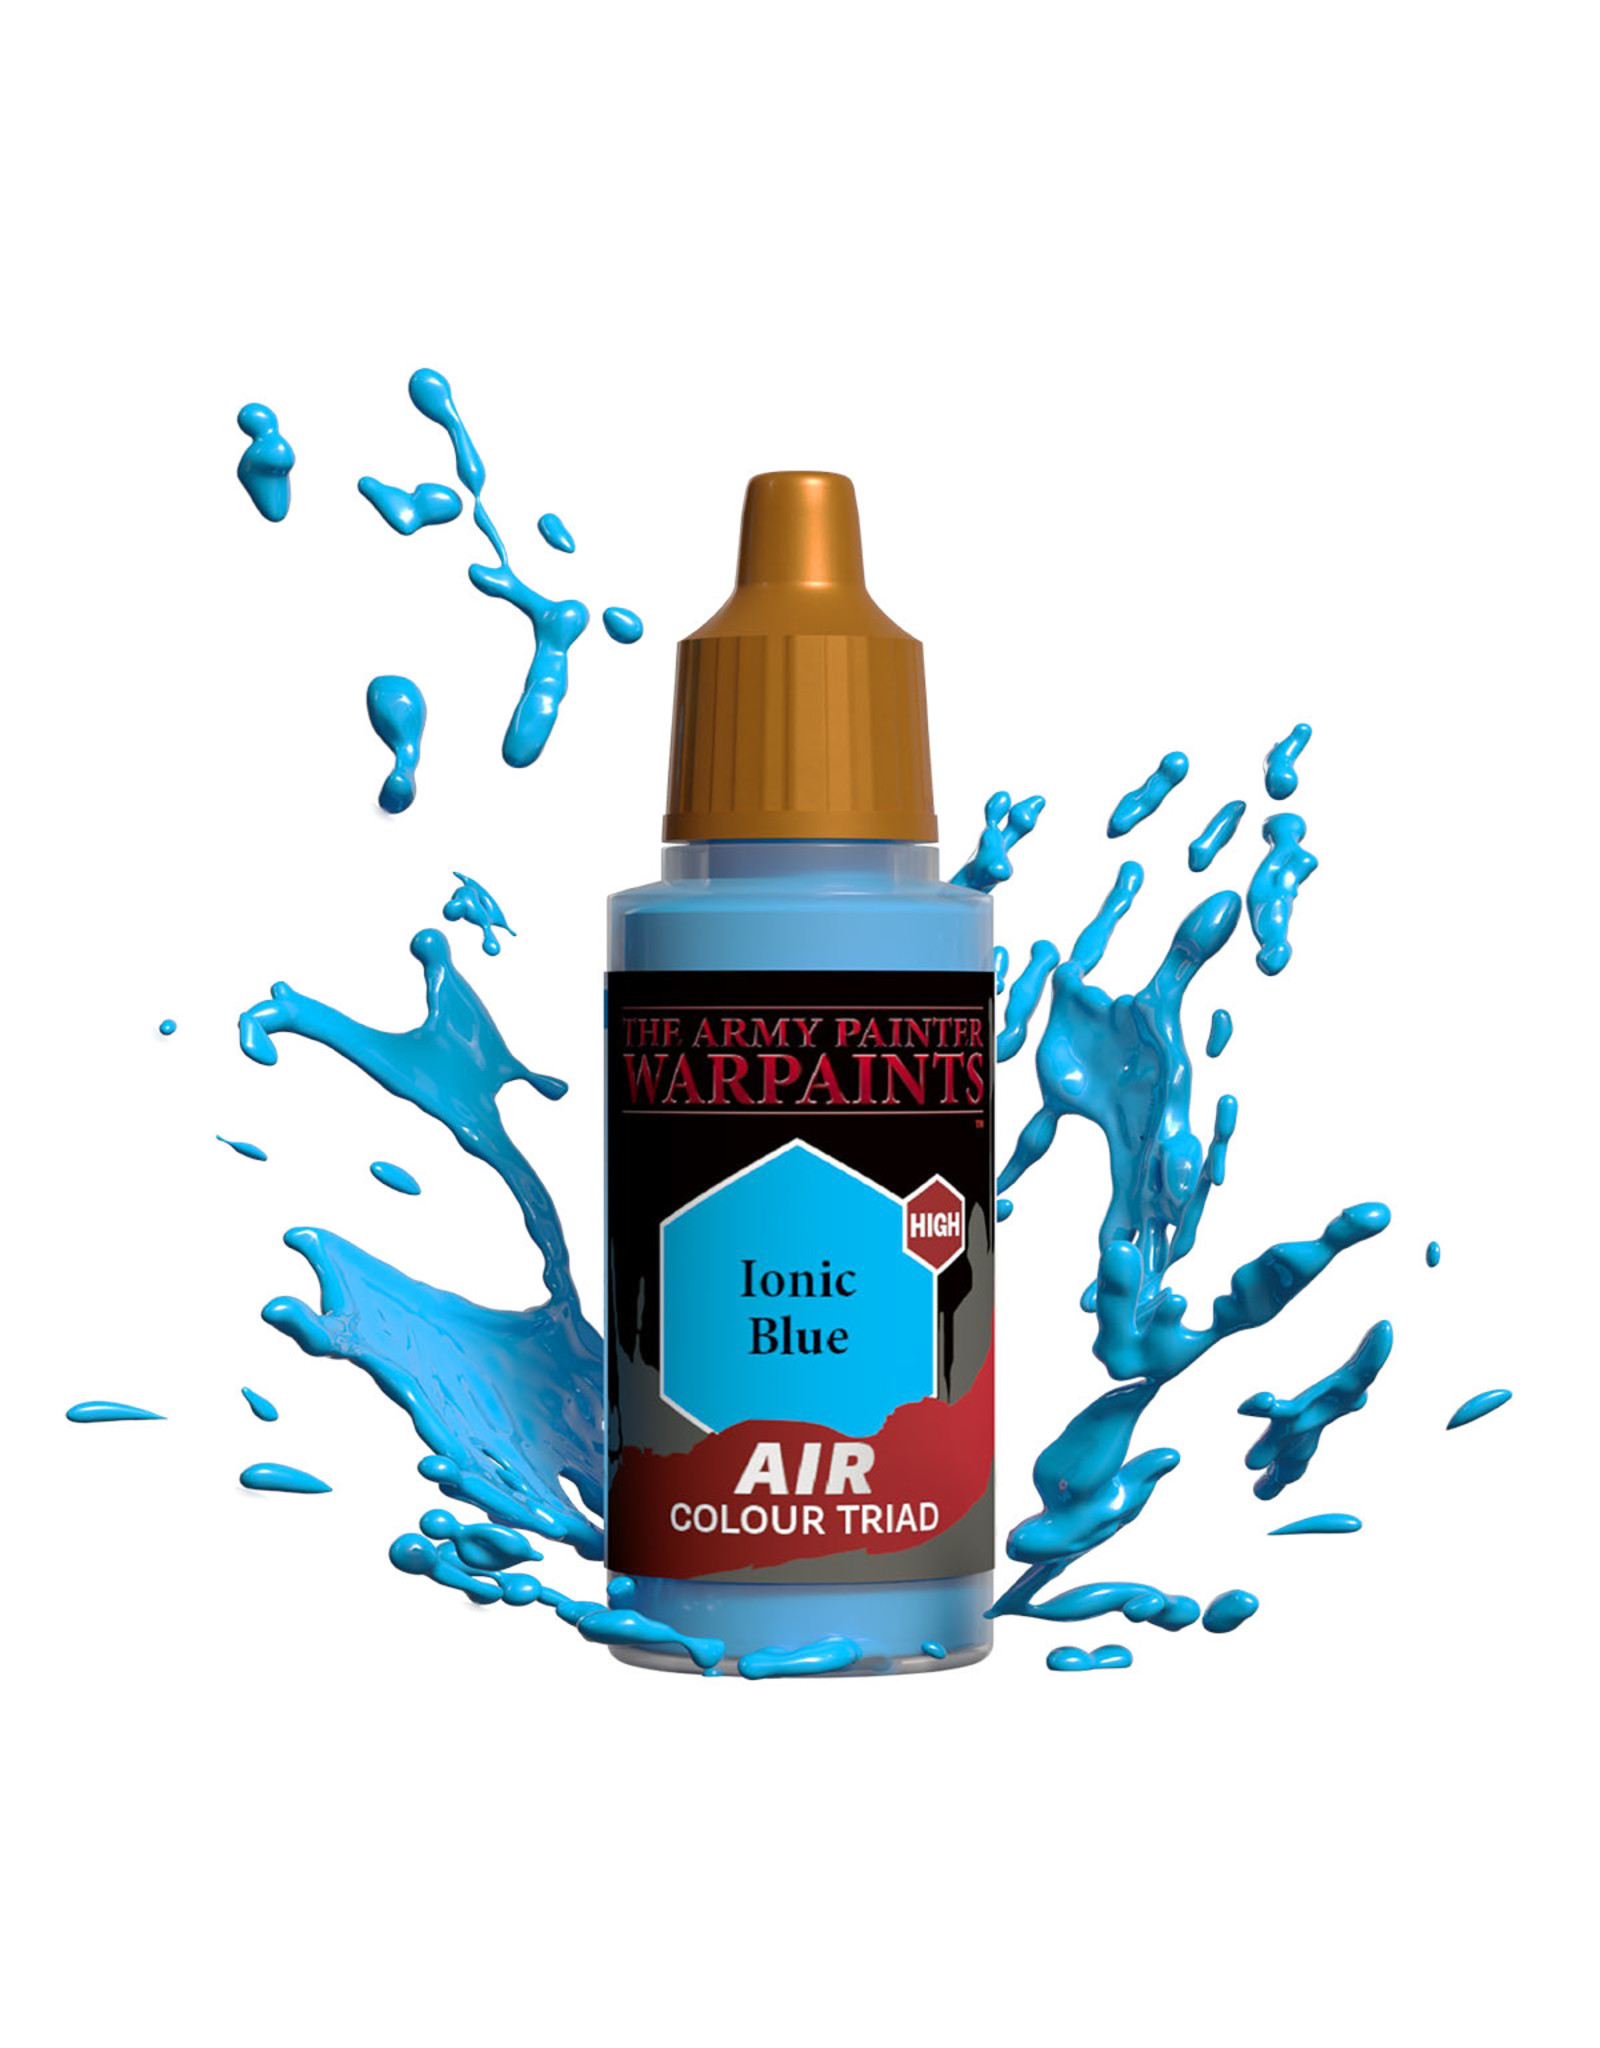 The Army Painter The Army Painter Warpaints Air: Ionic Blue